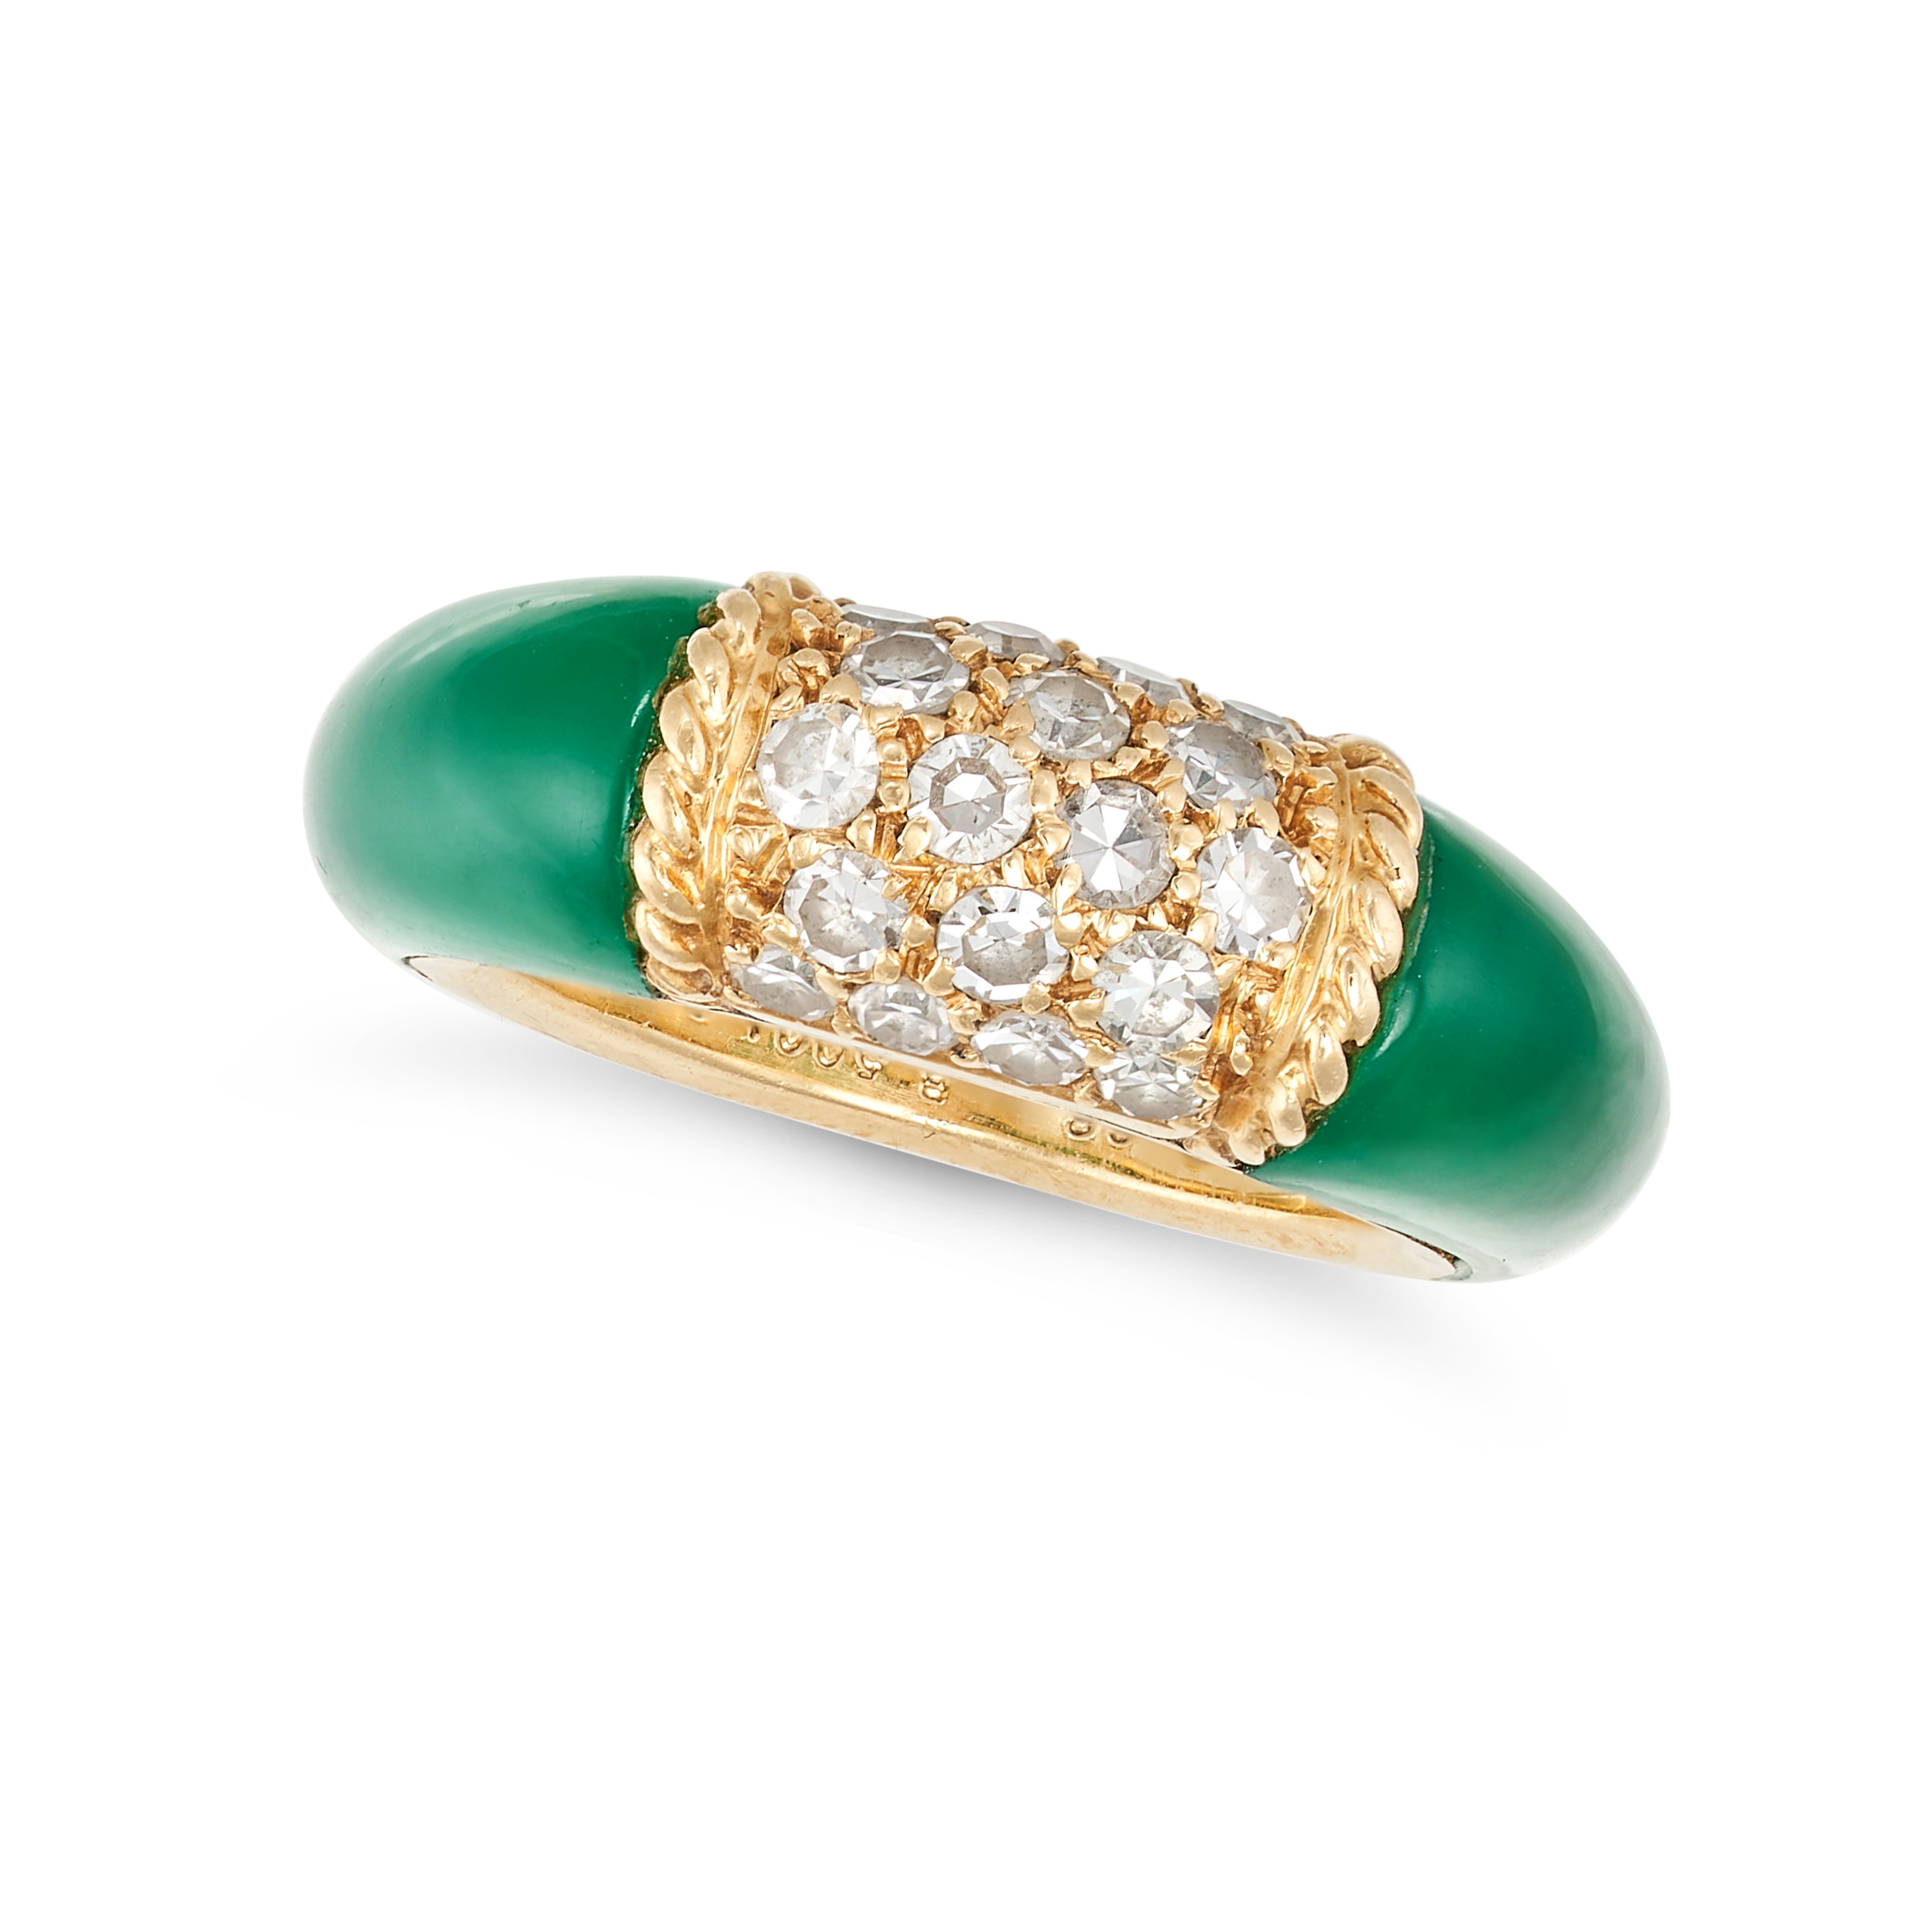 VAN CLEEF AND ARPELS, A VINTAGE CHRYSOPRASE AND DIAMOND PHILIPPINES RING in 18ct yellow gold, set...